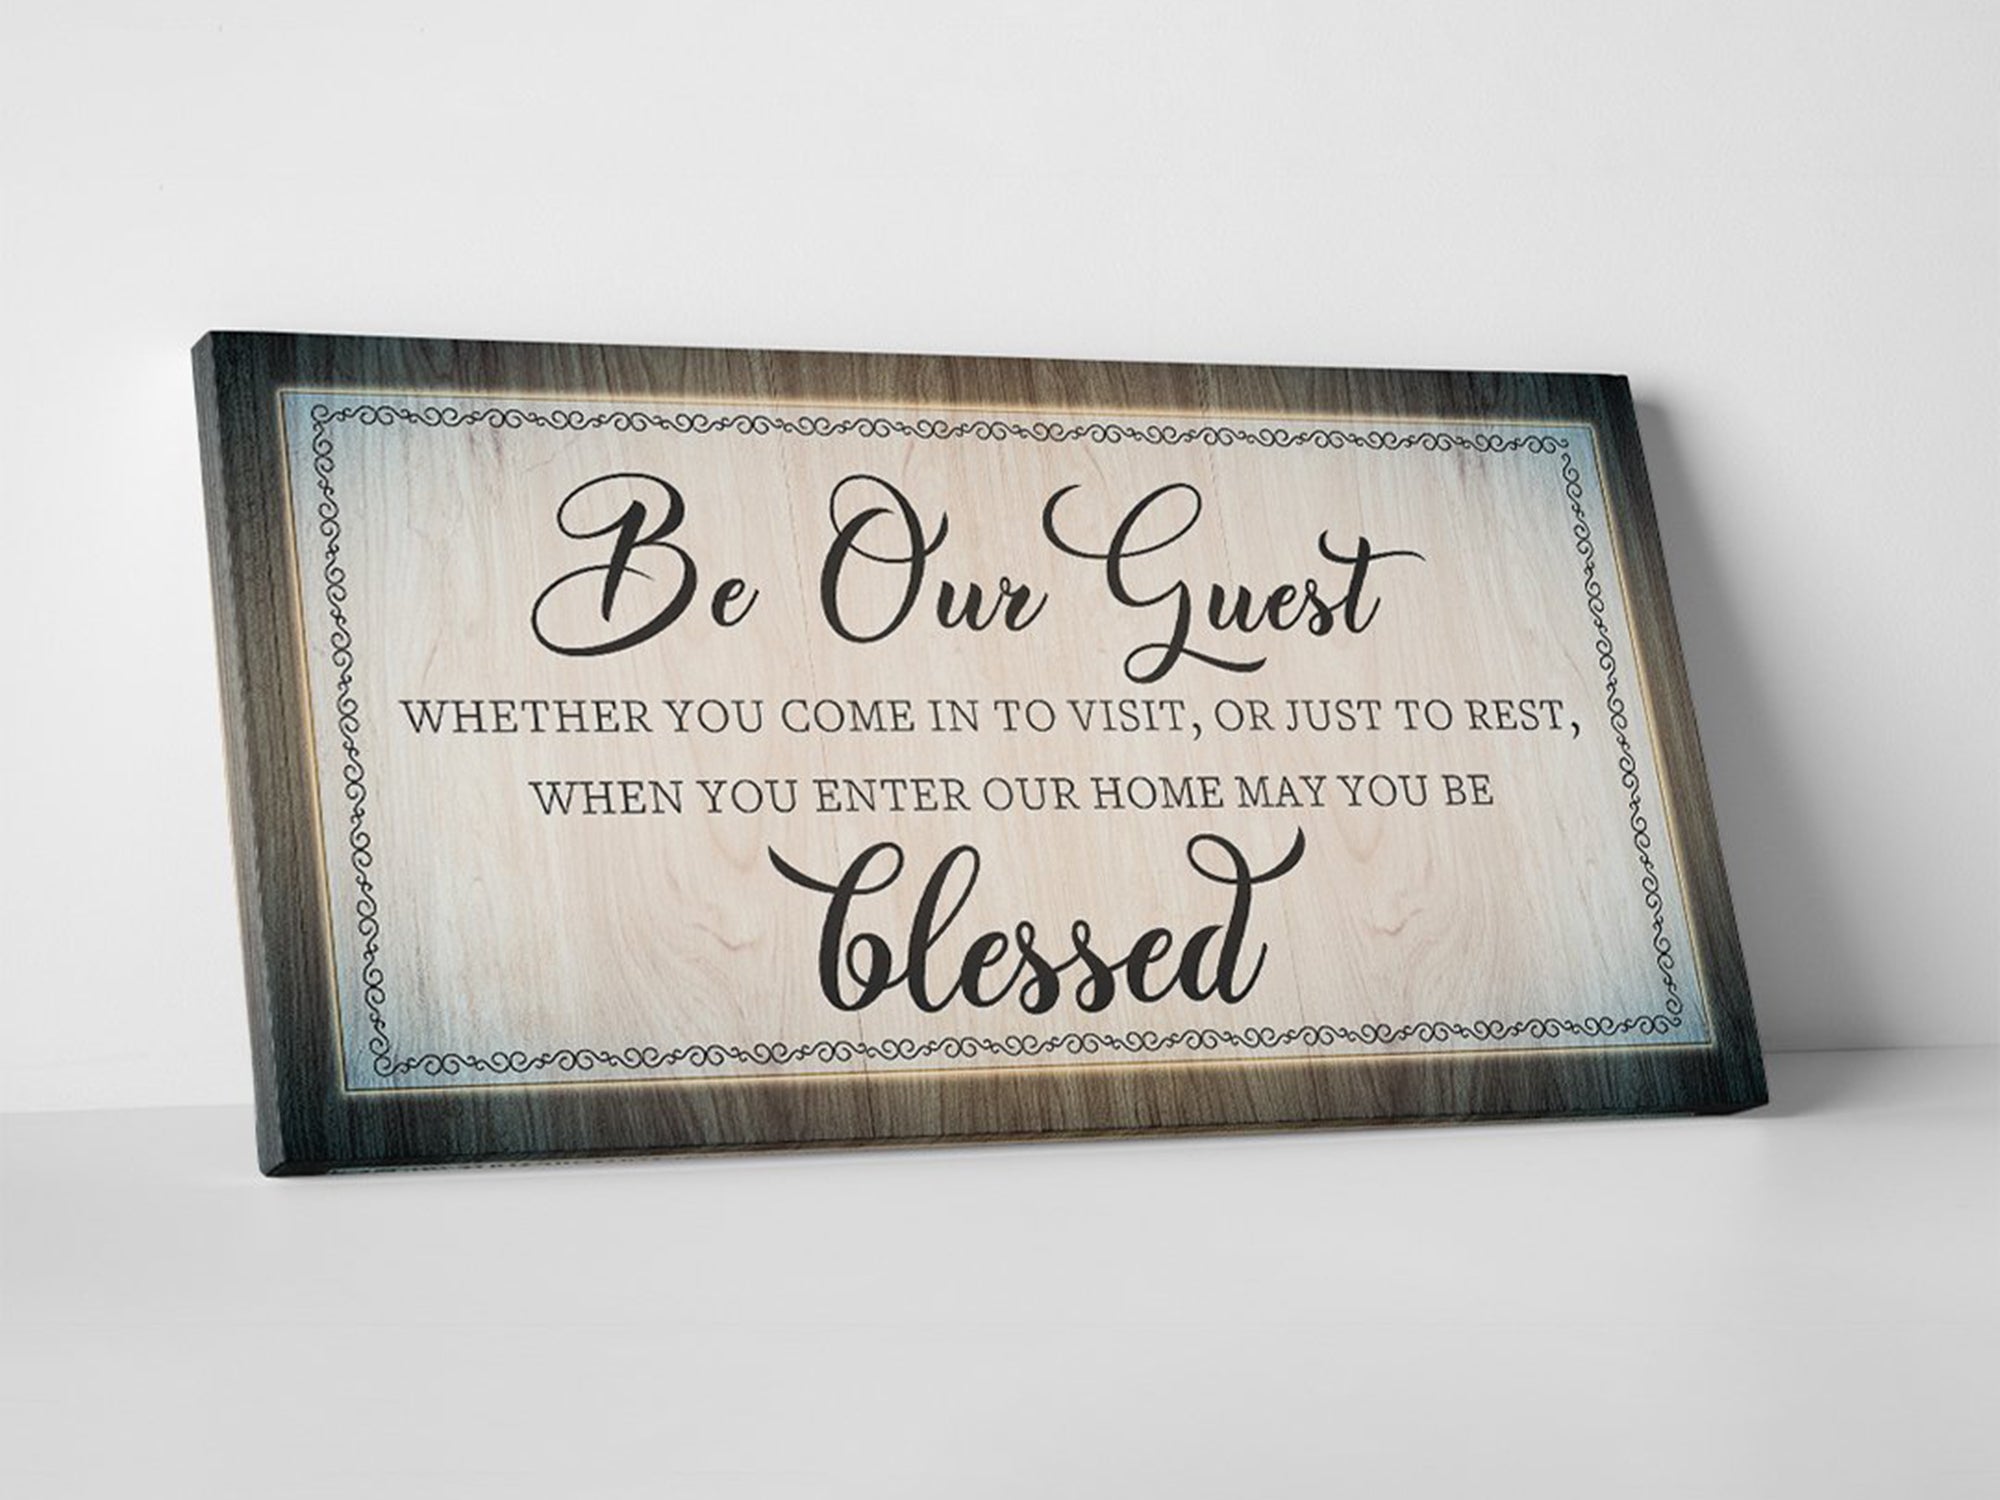 Be Our Guest - Bedroom - Canvas Wall Art